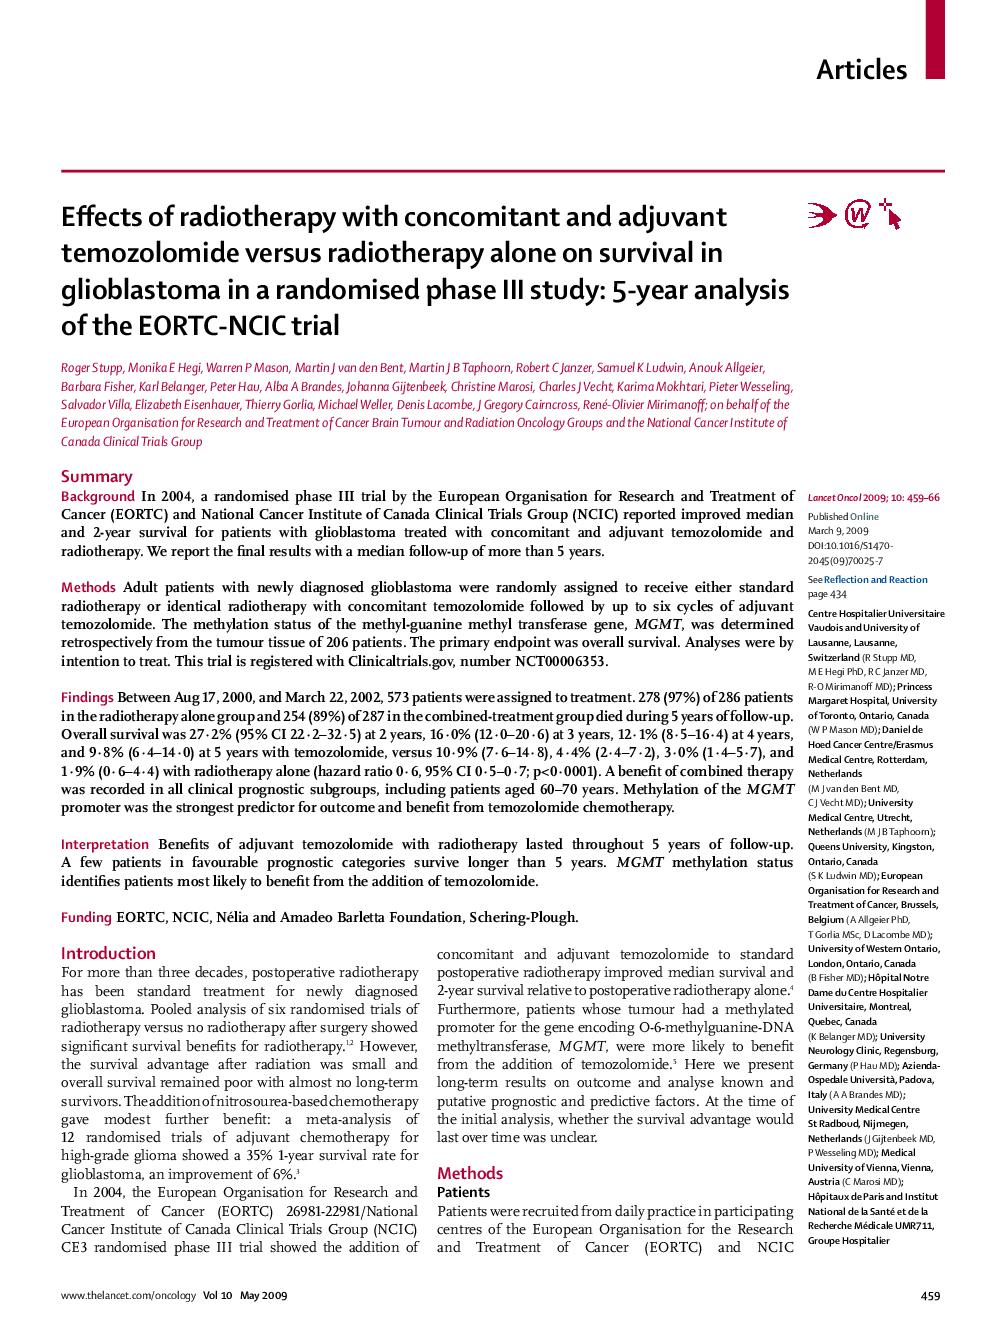 Effects of radiotherapy with concomitant and adjuvant temozolomide versus radiotherapy alone on survival in glioblastoma in a randomised phase III study: 5-year analysis of the EORTC-NCIC trial